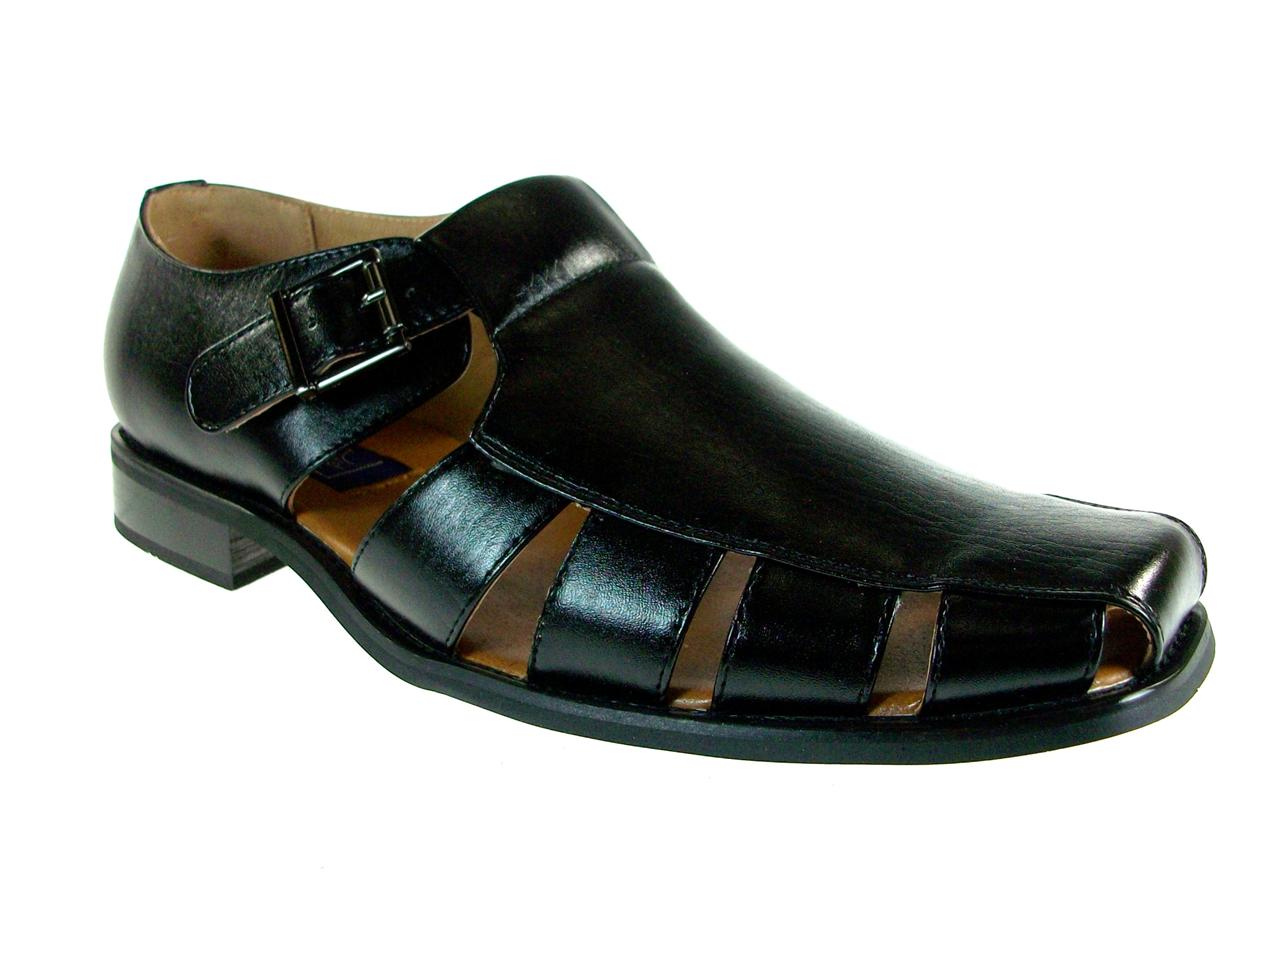 Mens Closed Toe Casual Dress Shoe Sandals w/ Leather Lining 33289 | eBay